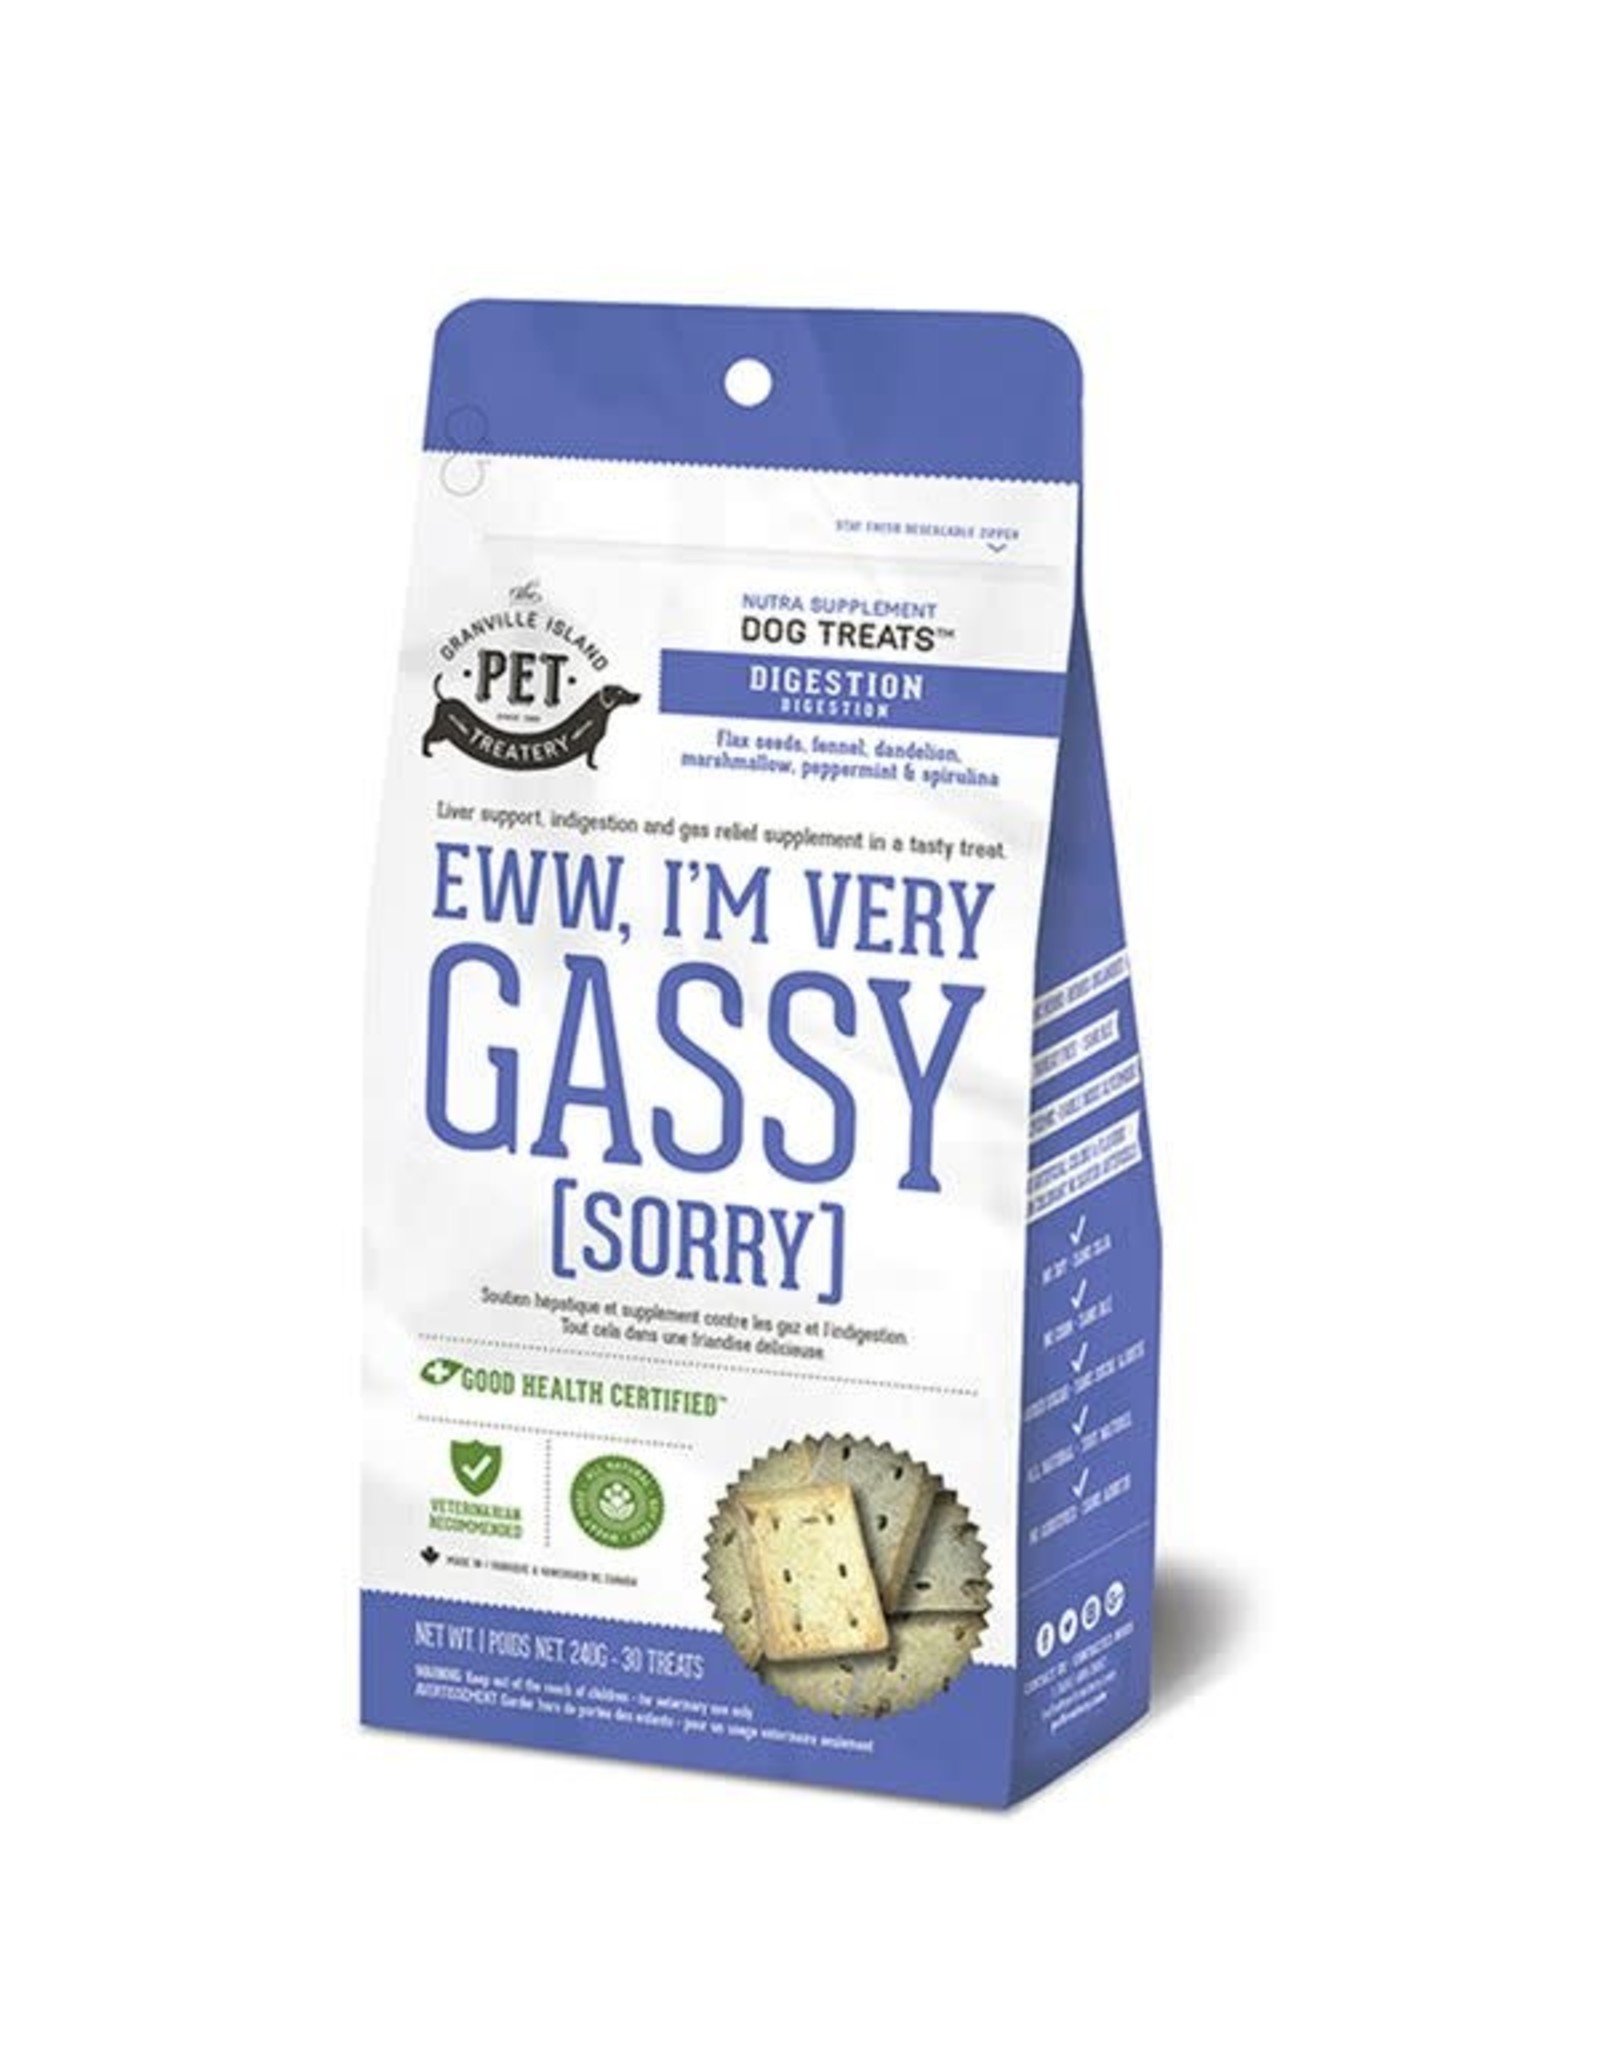 Granville Island Pet Treatery Granville Digestion Treats Eww I'm Very Gassy Sorry Dog 1X240G